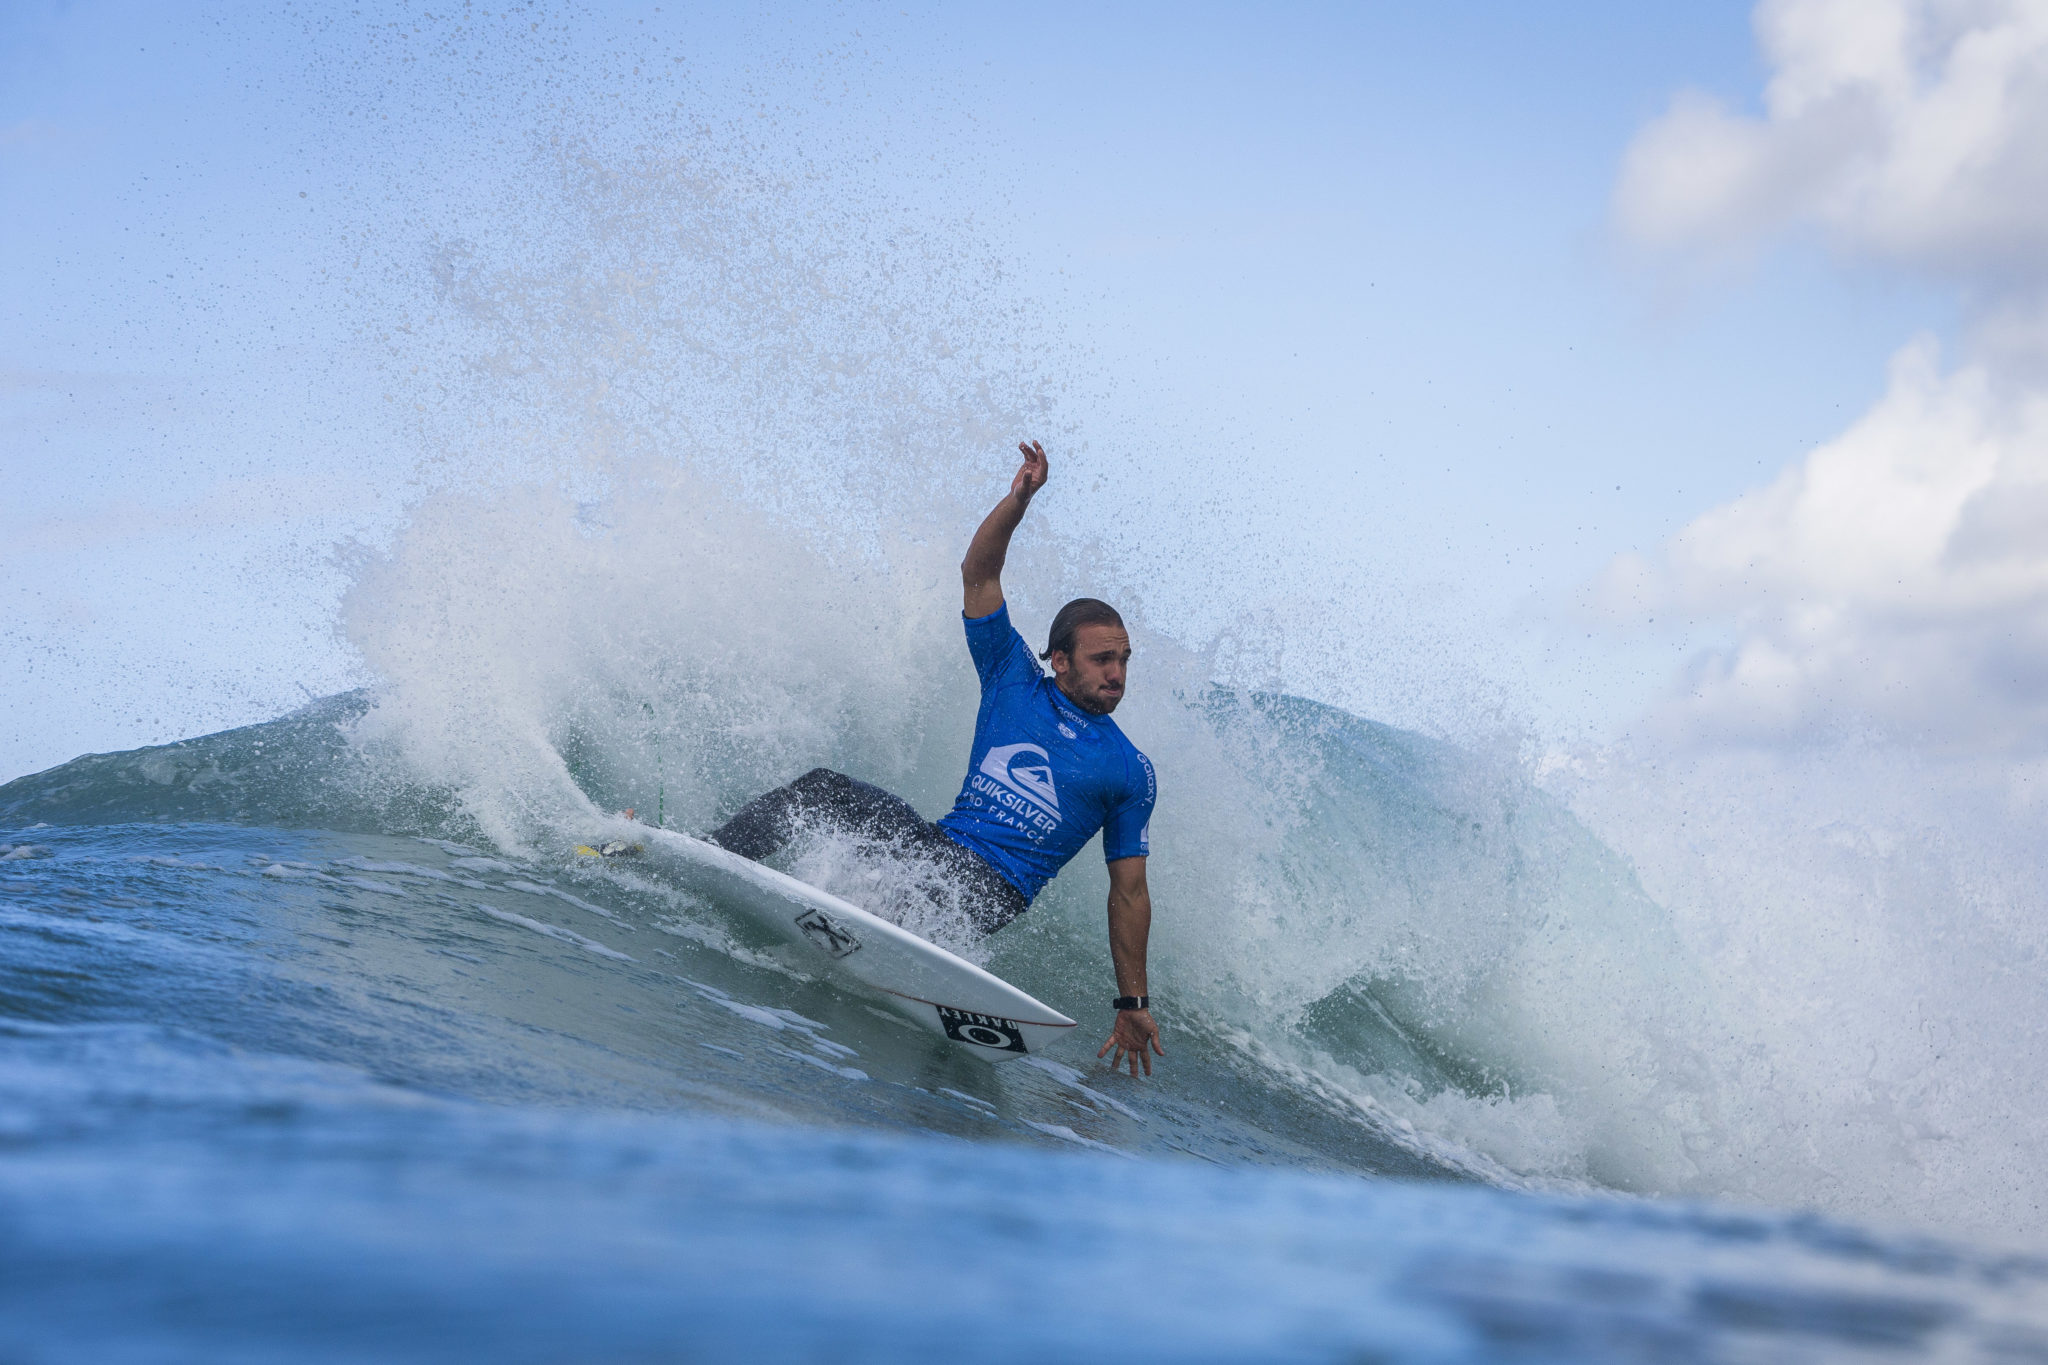 Caio Ibelli (BRA) Placed 1 st in   Heat 10 of Round One at Quiksilver Pro France 16